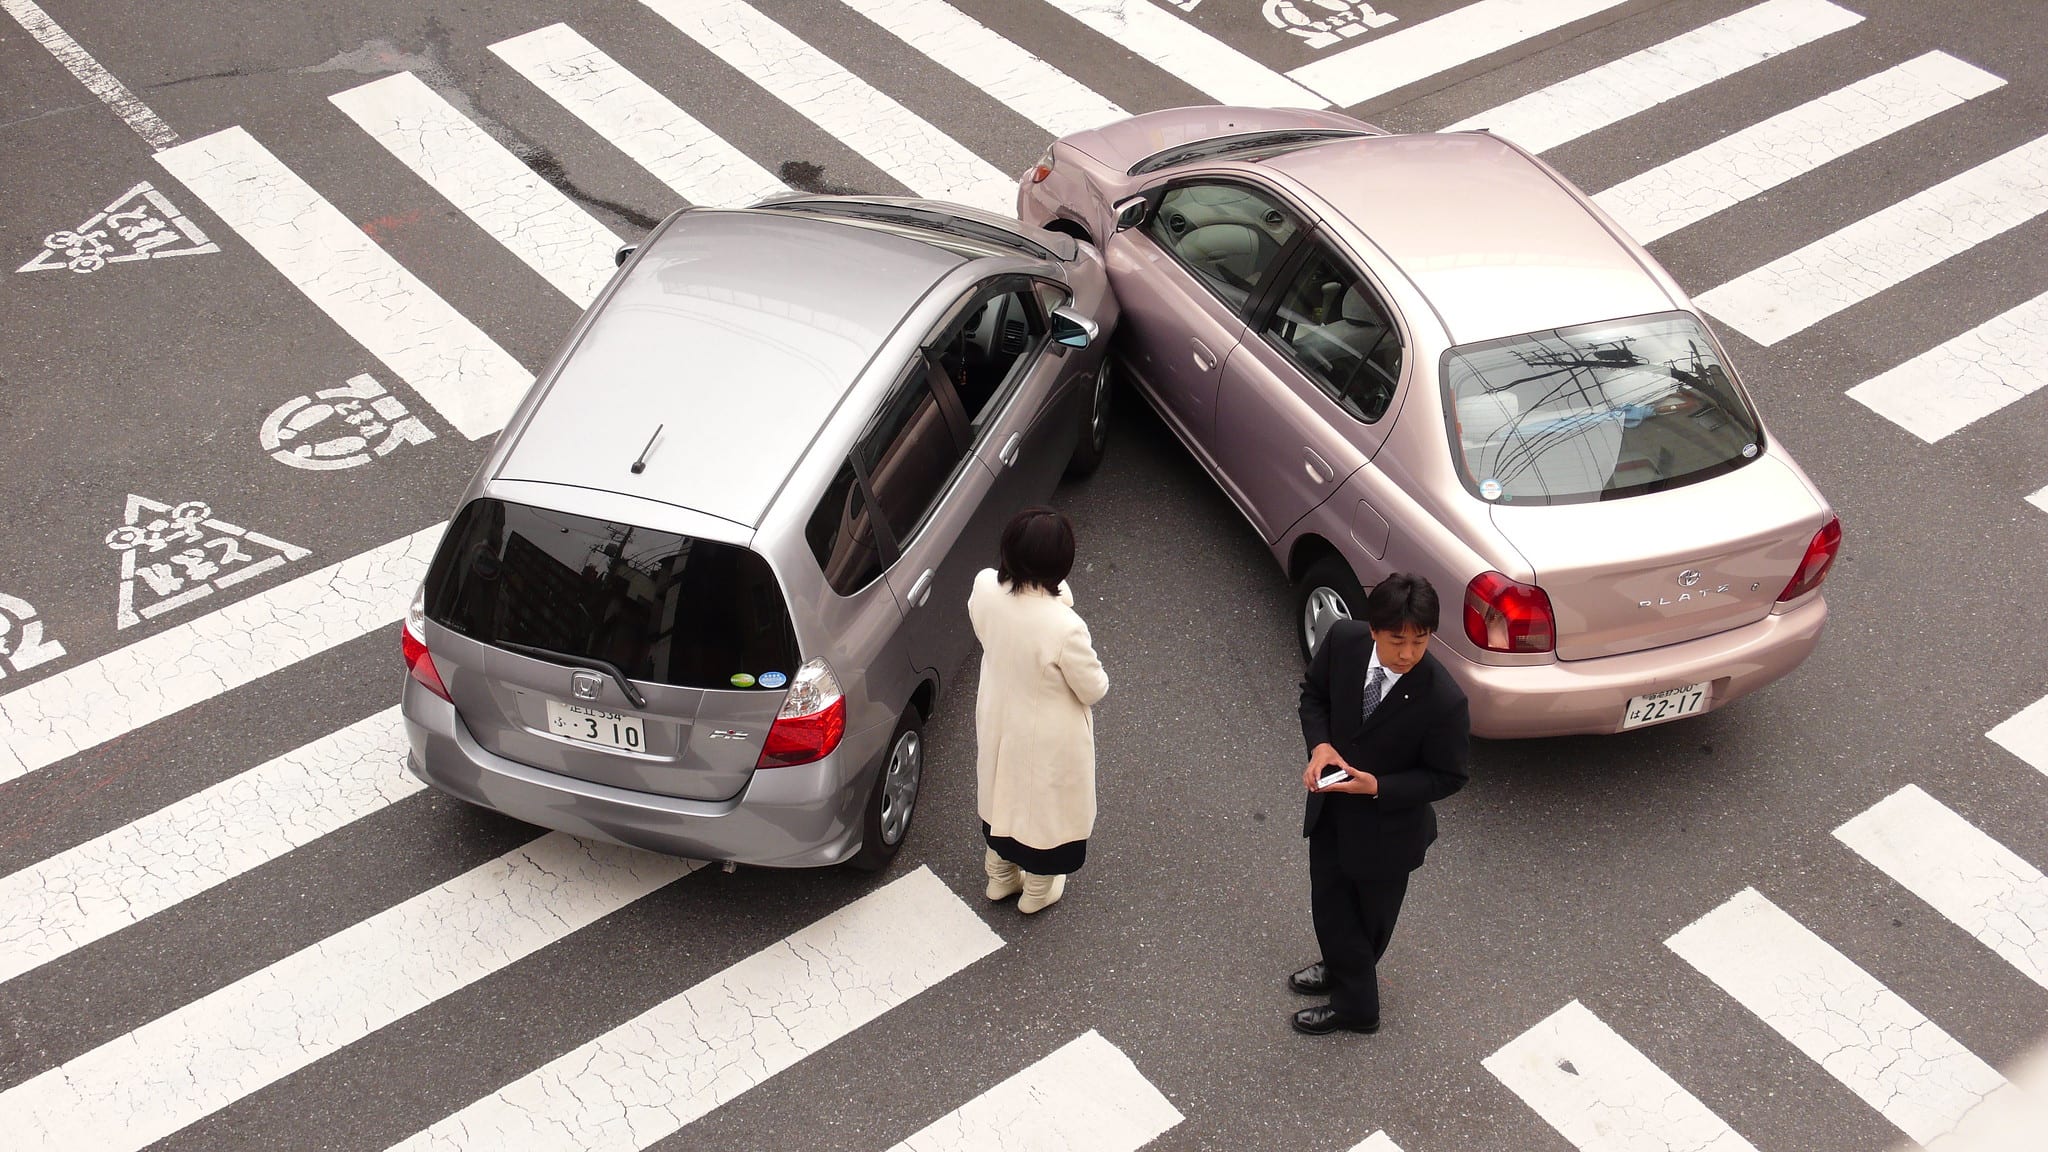 Two cars in an accident in an intersection; image by Shuets Udono, via Flickr, CC BY-SA 2.0, no changes.